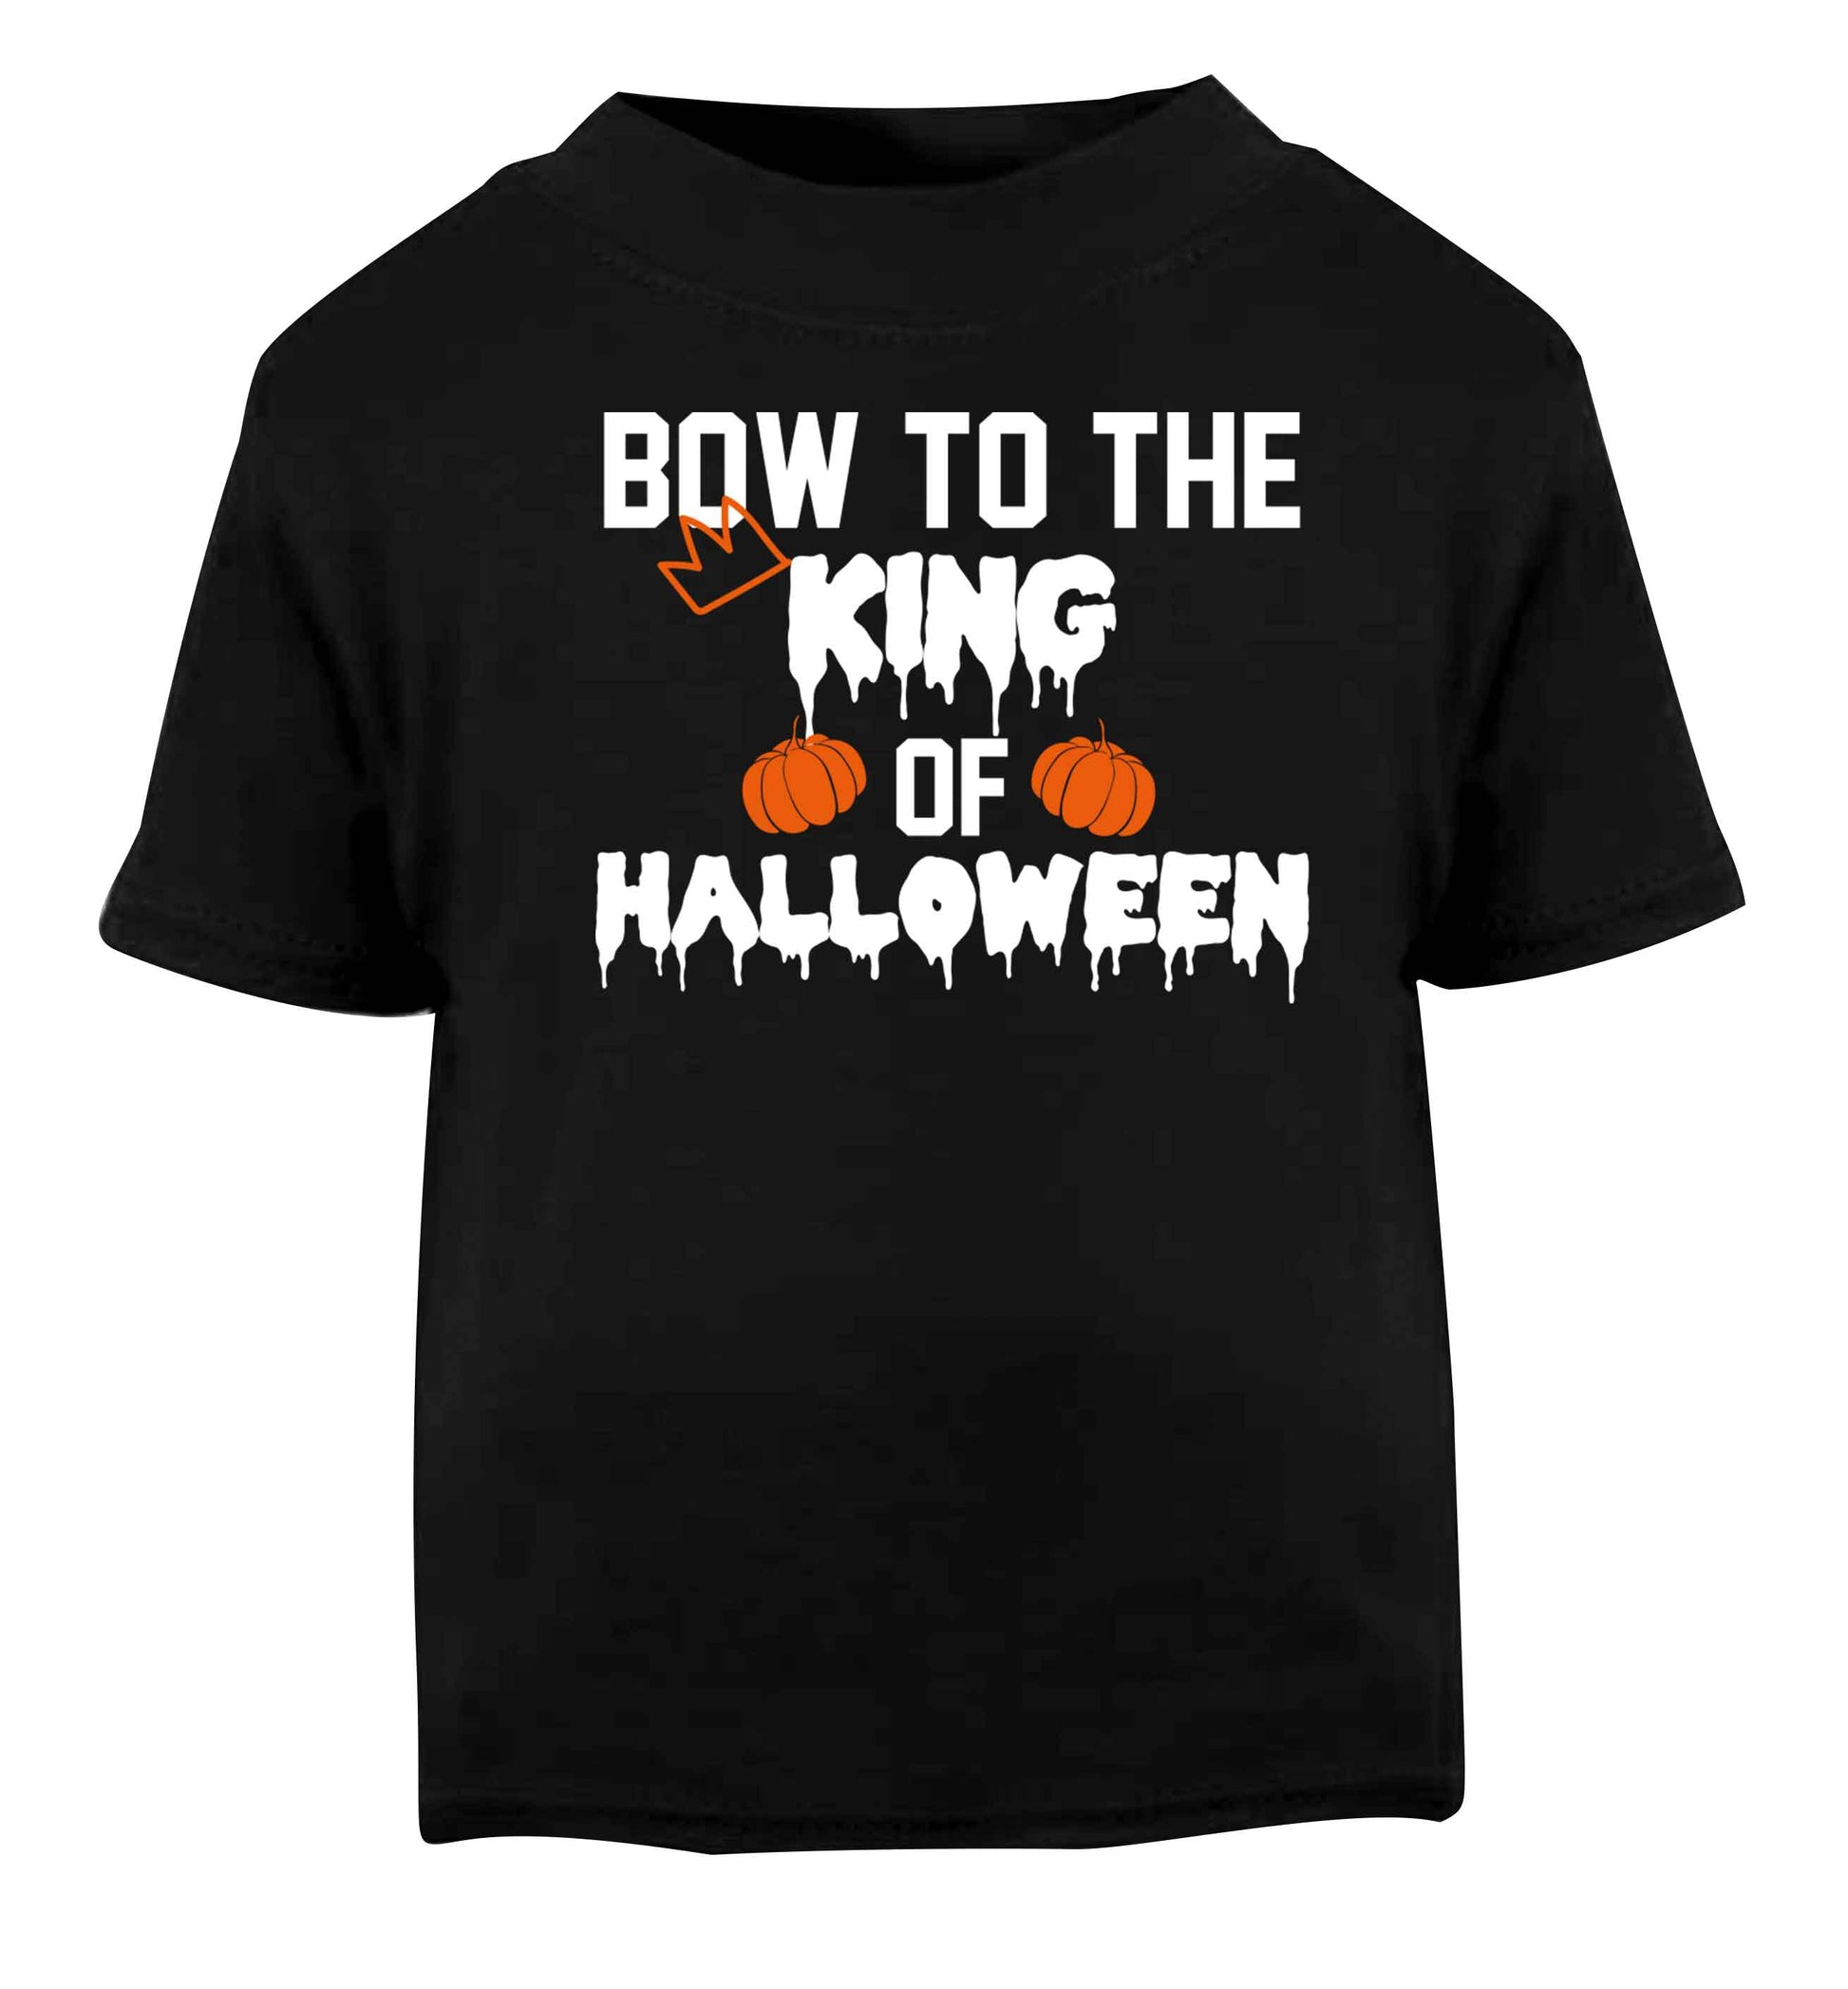 Bow to the King of halloween Black baby toddler Tshirt 2 years